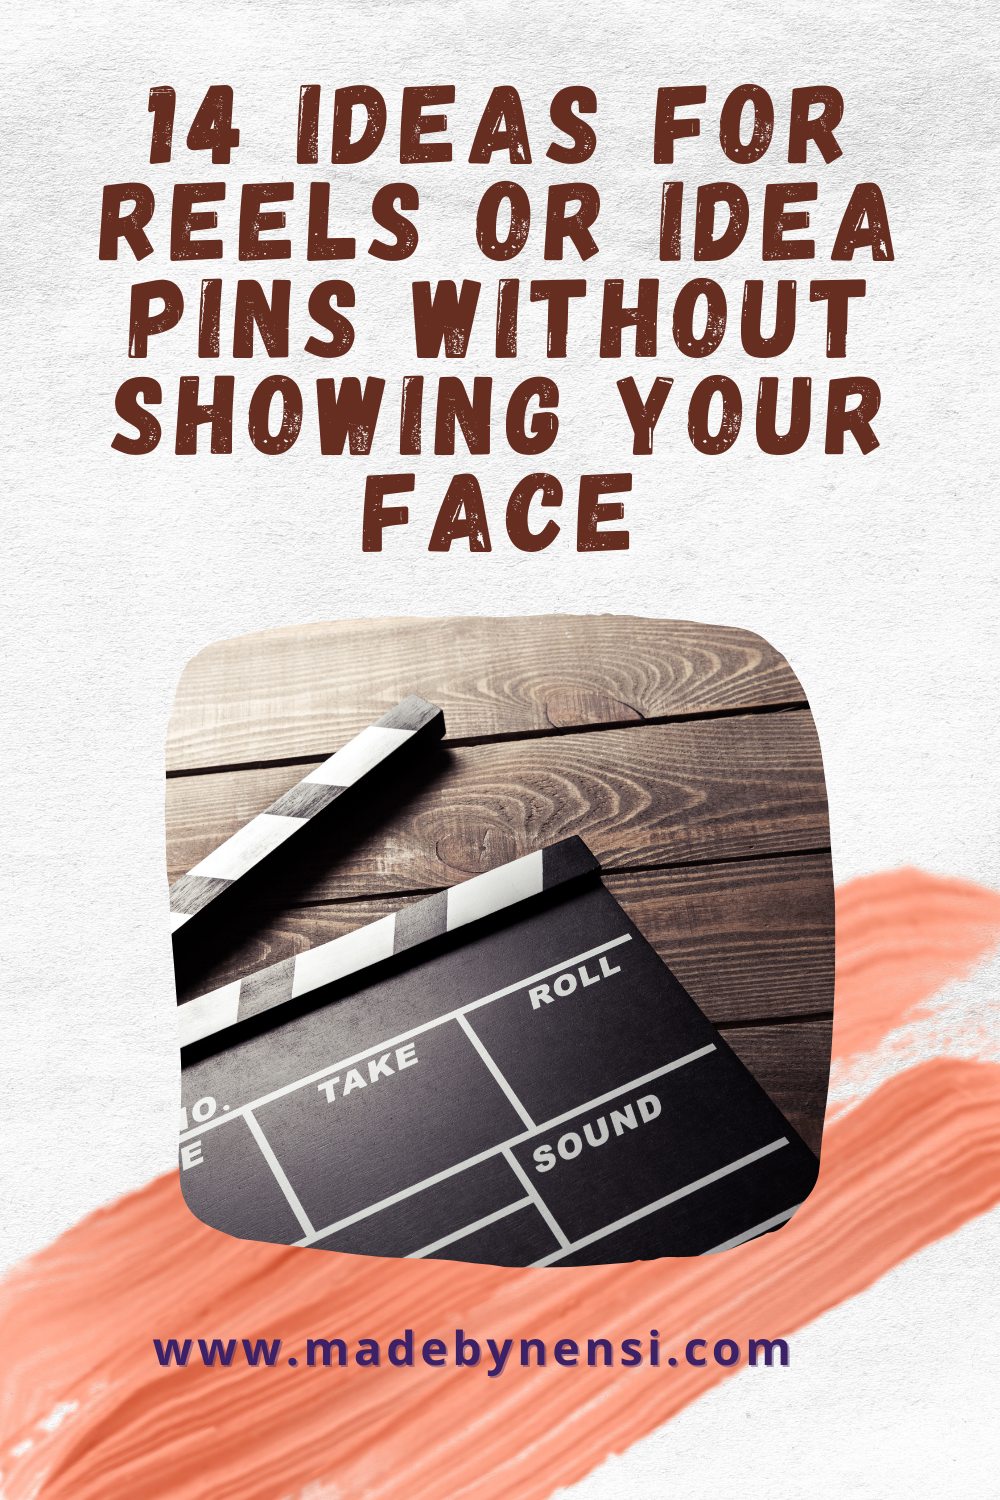 14 Ideas for Reels or Idea Pins without showing your face.png